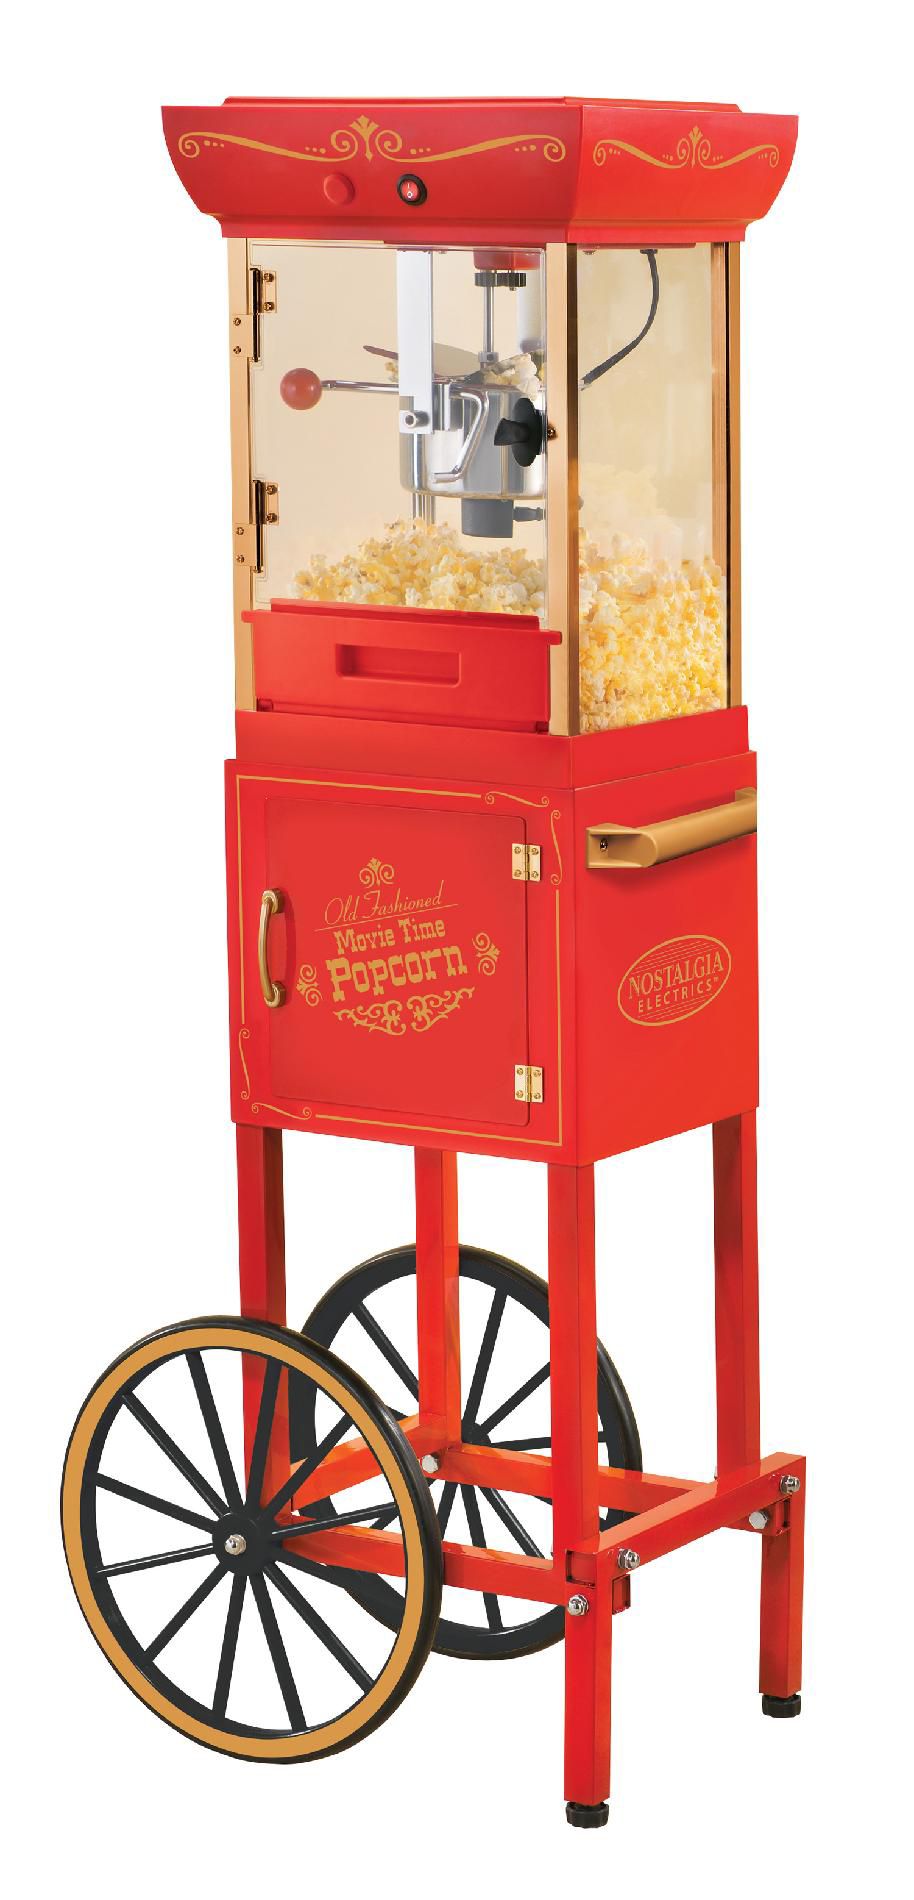 Nostalgia Electrics CCP400  Vintage Collection 48" Old Fashioned Movie Time Popcorn Cart